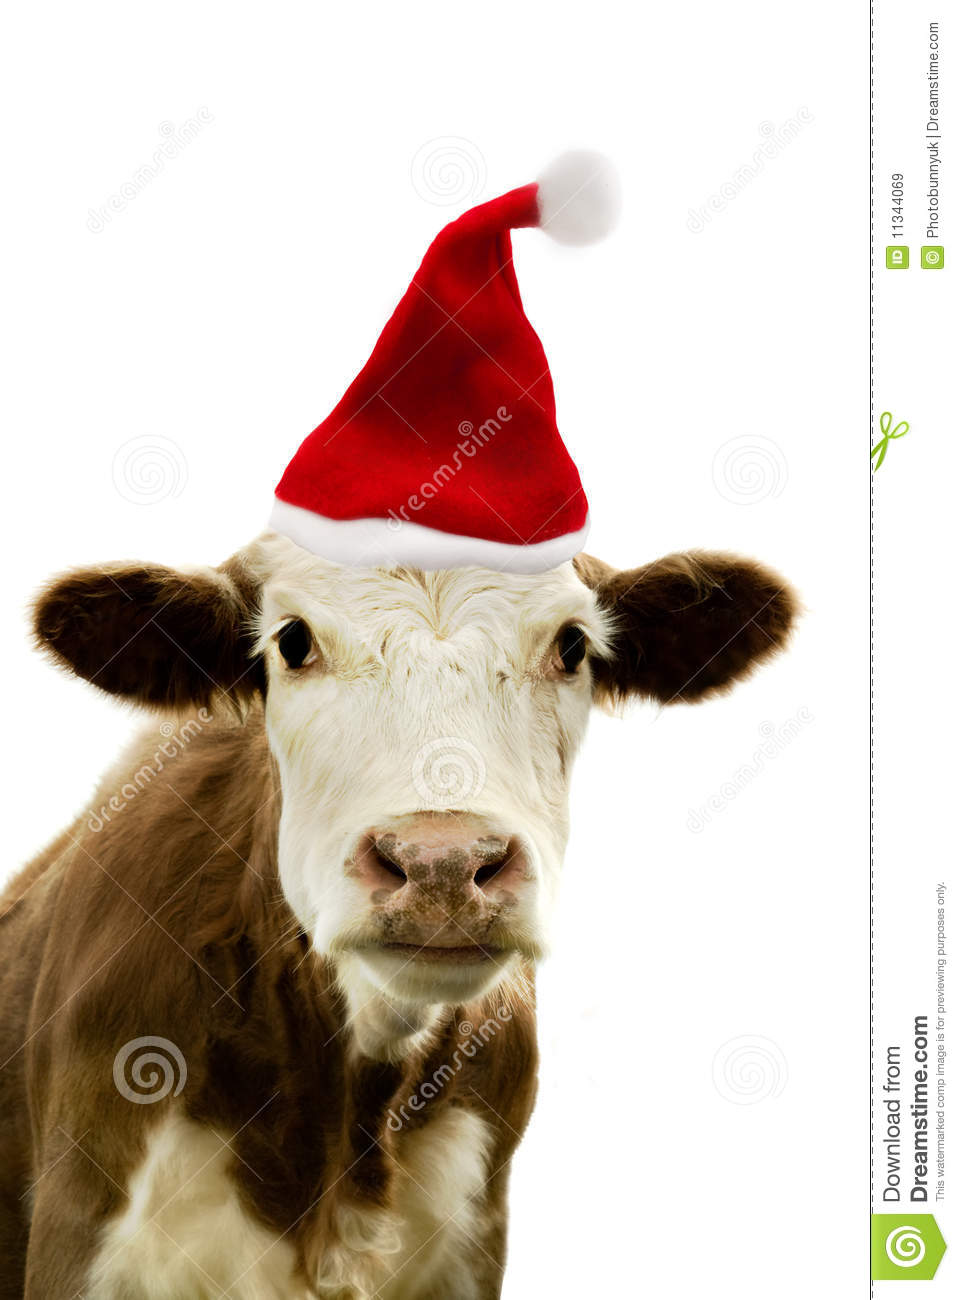 Christmas Cow Royalty Free Stock Images   Image  11344069